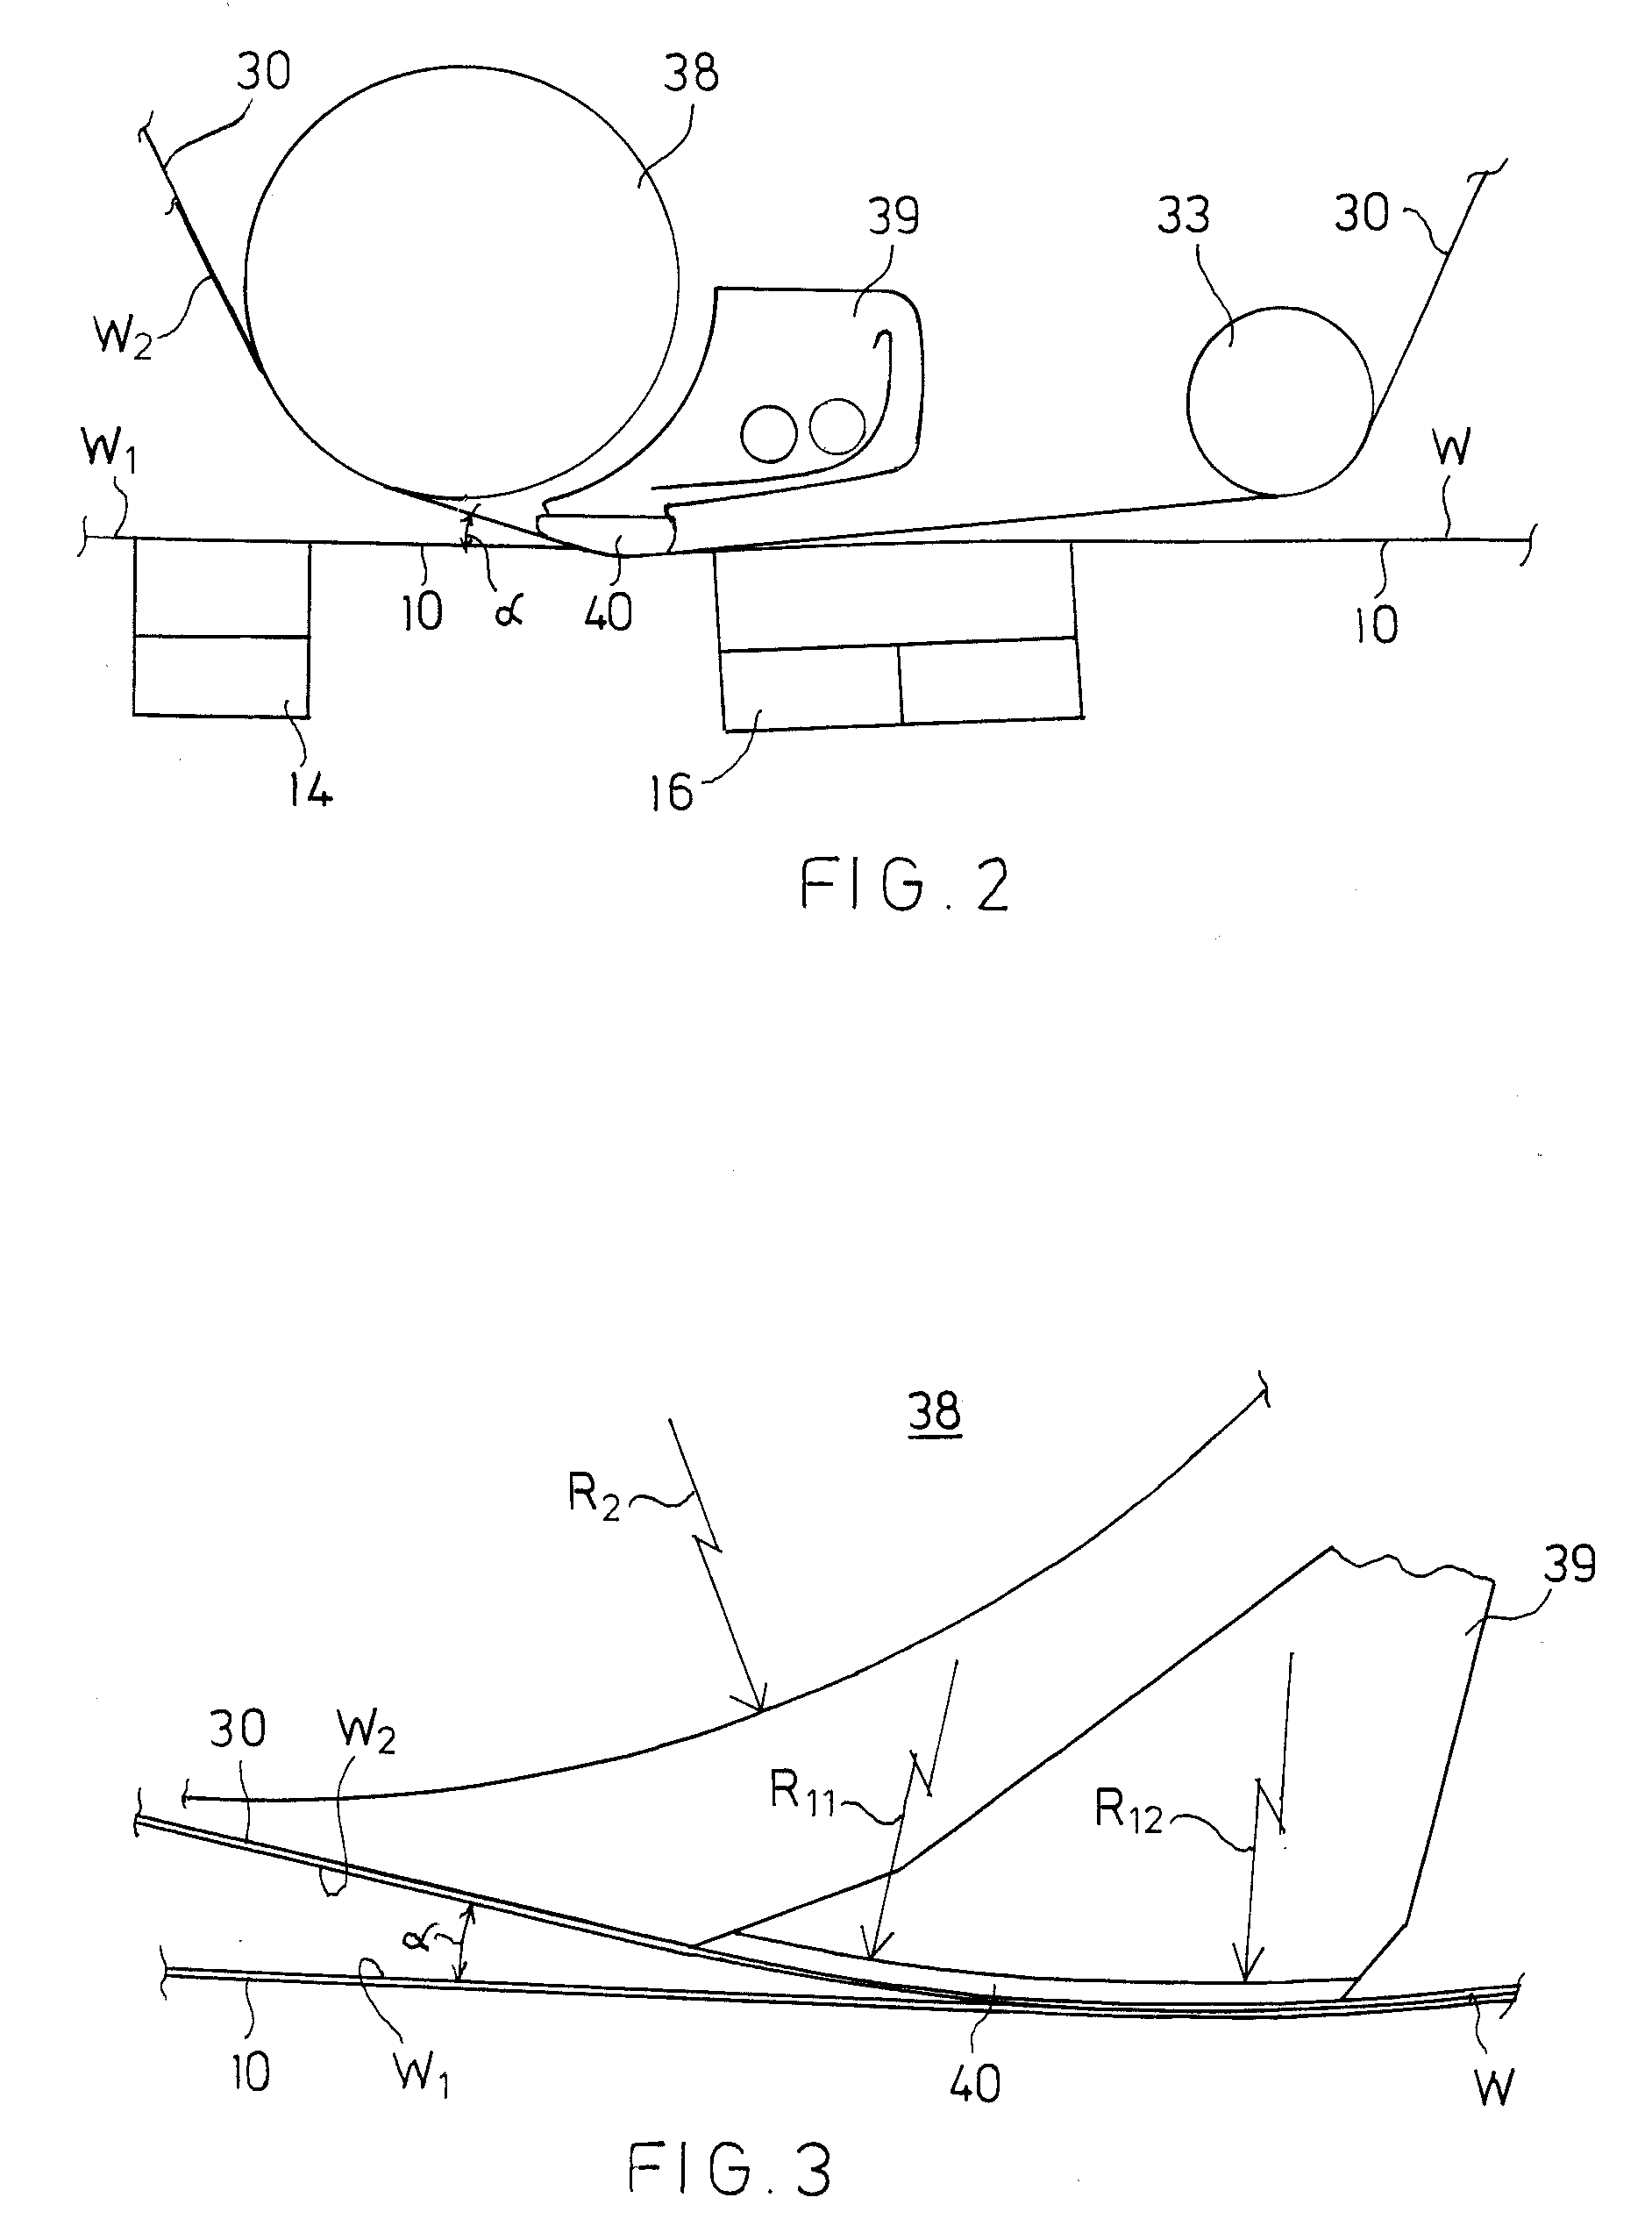 Web-Forming Section and Method for Manufacturing Multi-Layer Web